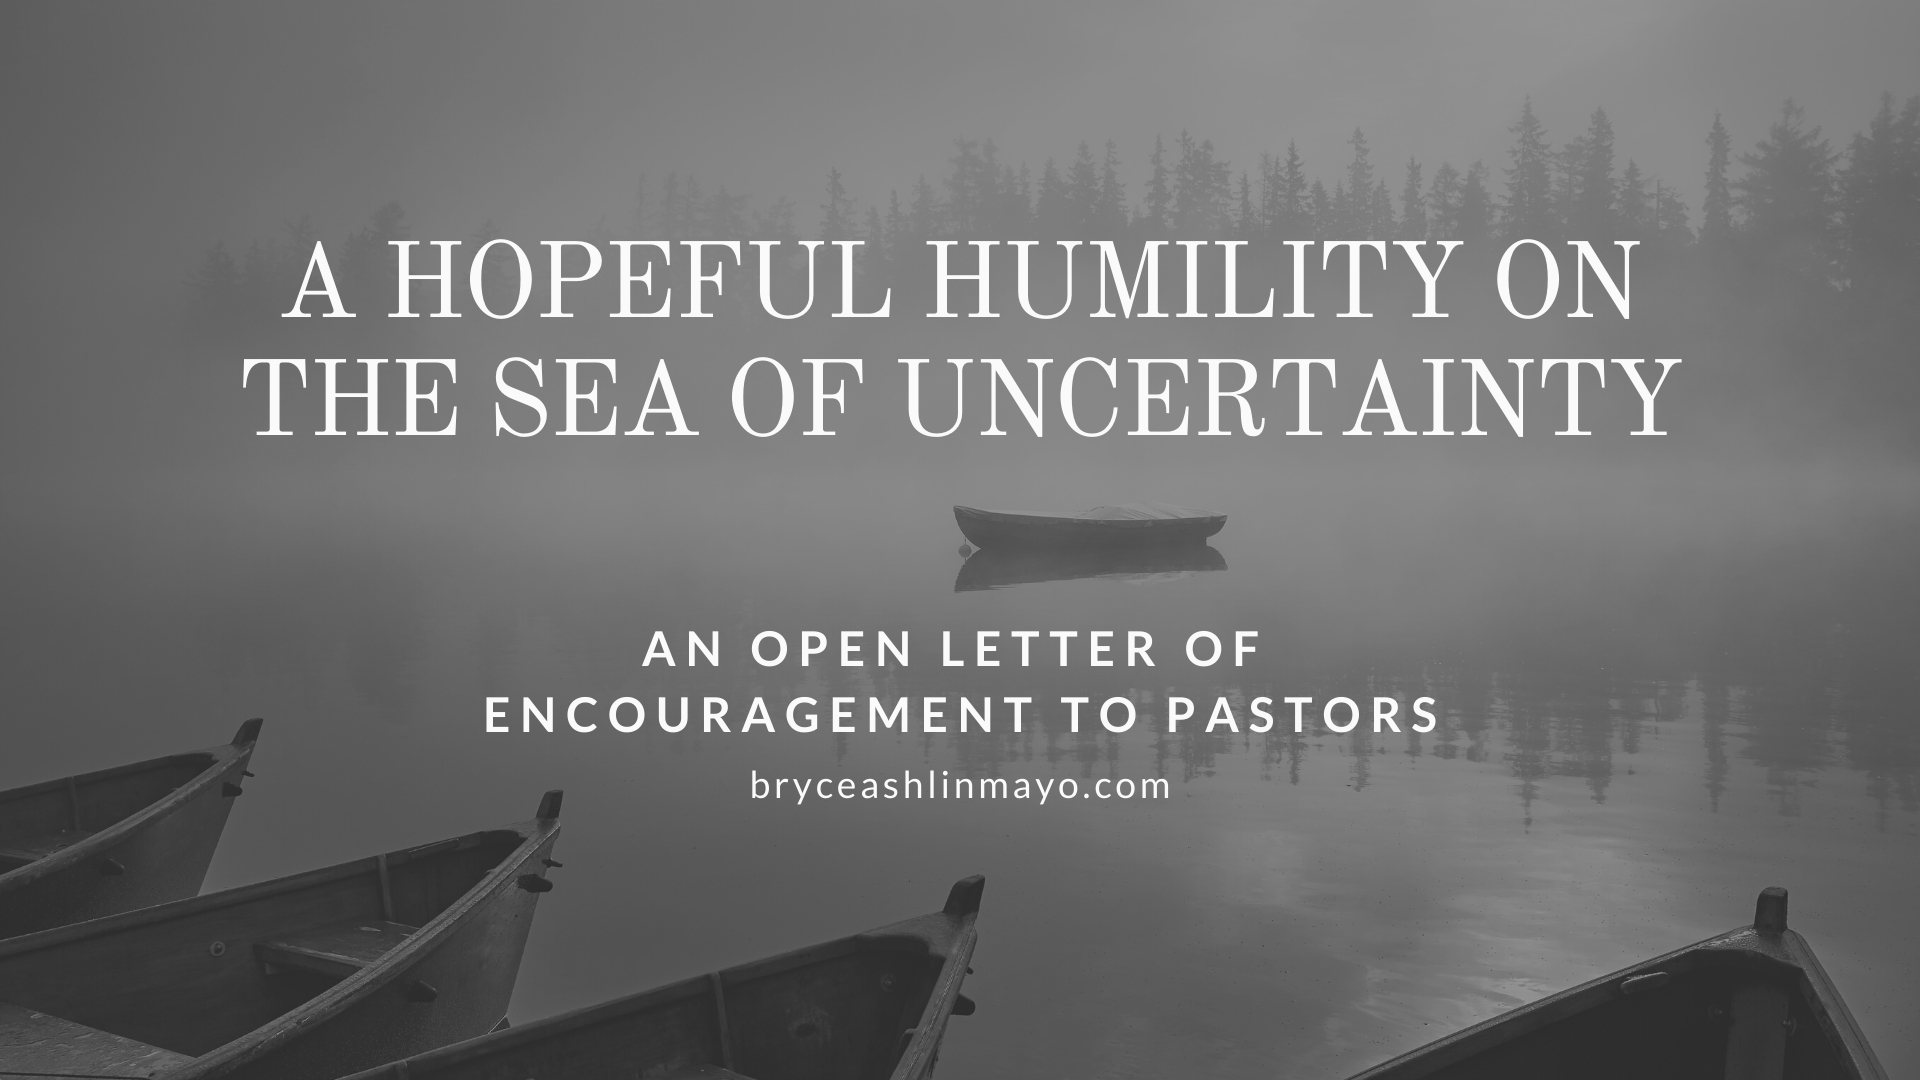 A Hopeful Humility on the Sea of Uncertainty